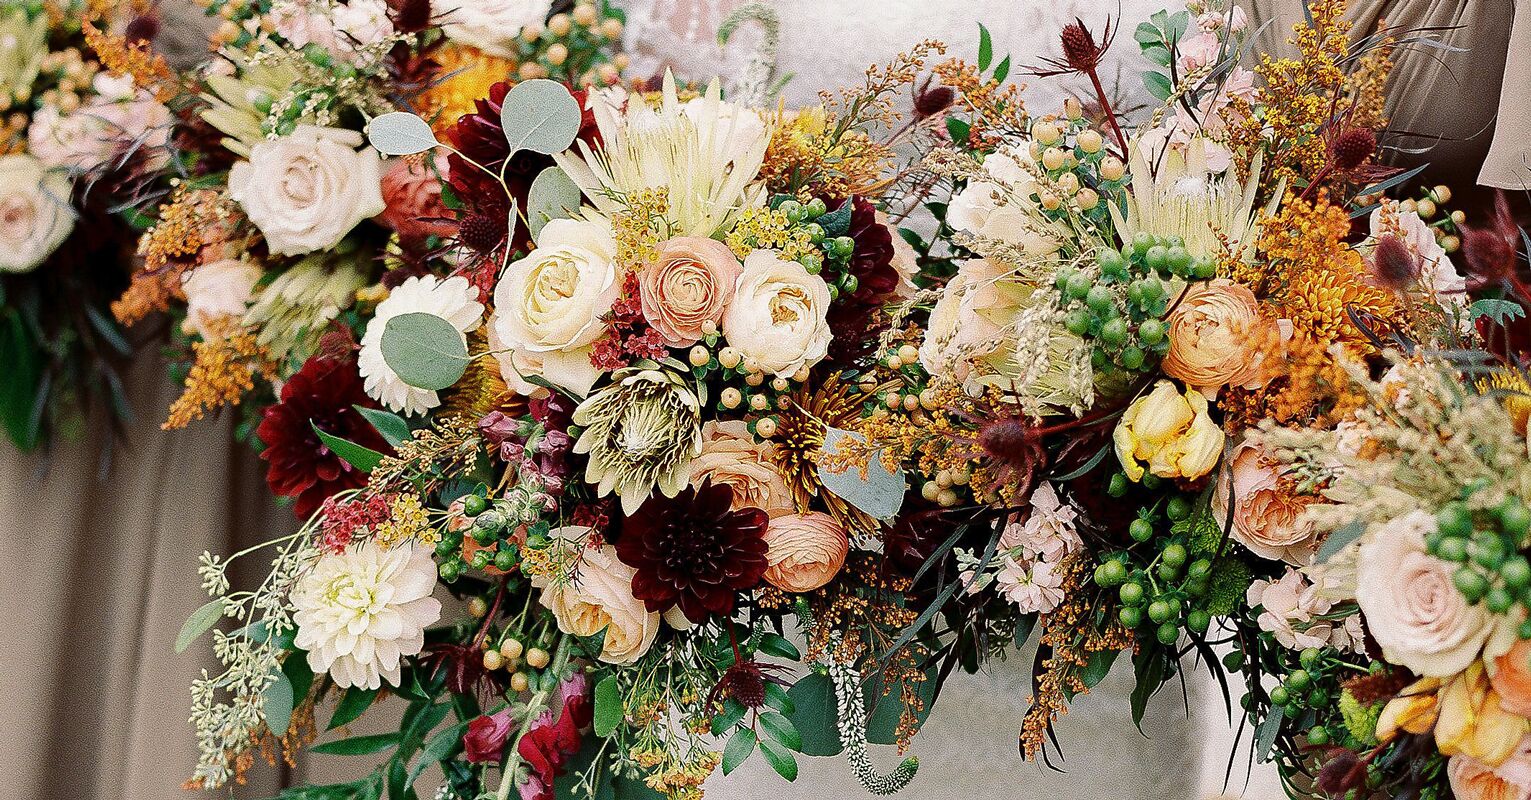 Top 10 Most Popular Wedding Flowers Ever TheKnot